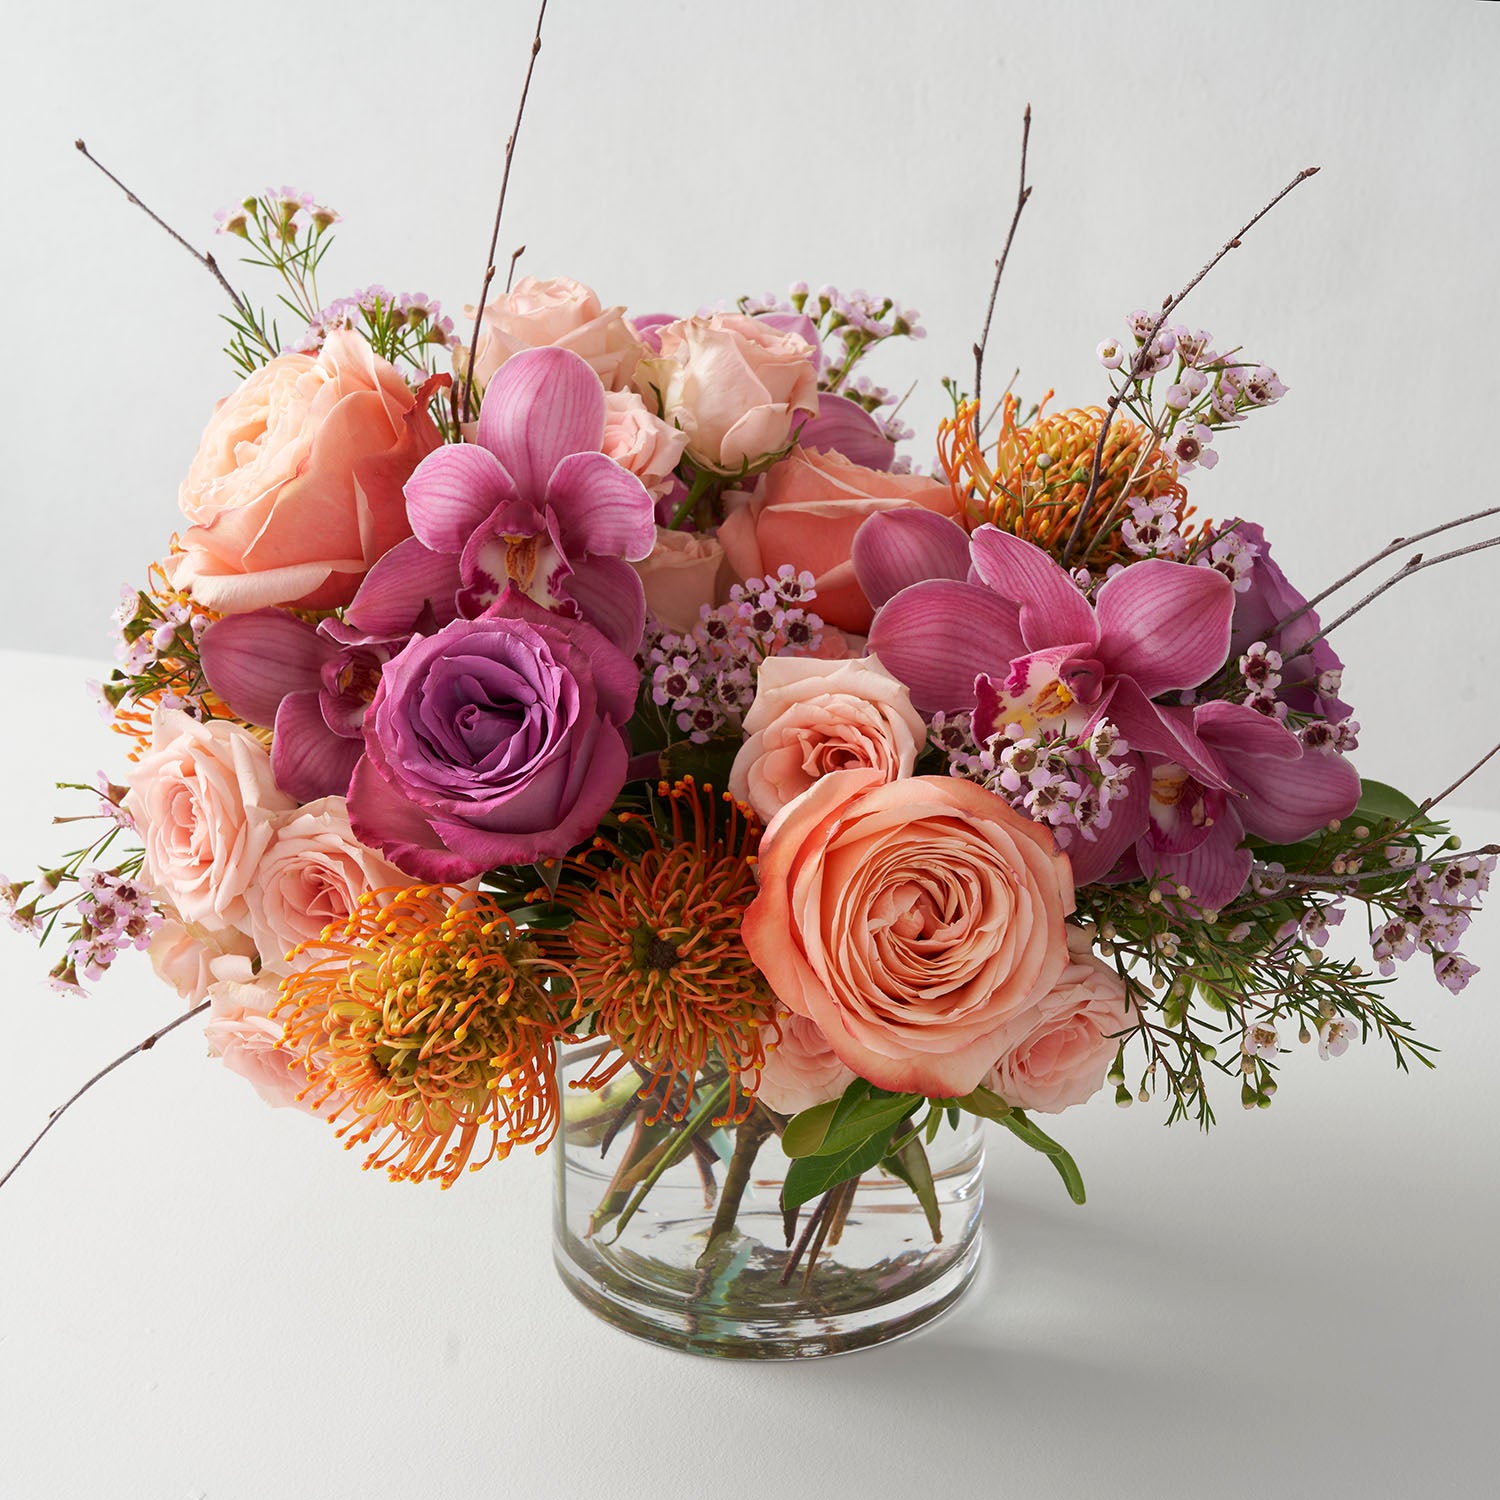 Peach and plum coloured roses with gold protea and plum cymbidium orchids, arranged in a glass vase on white background.